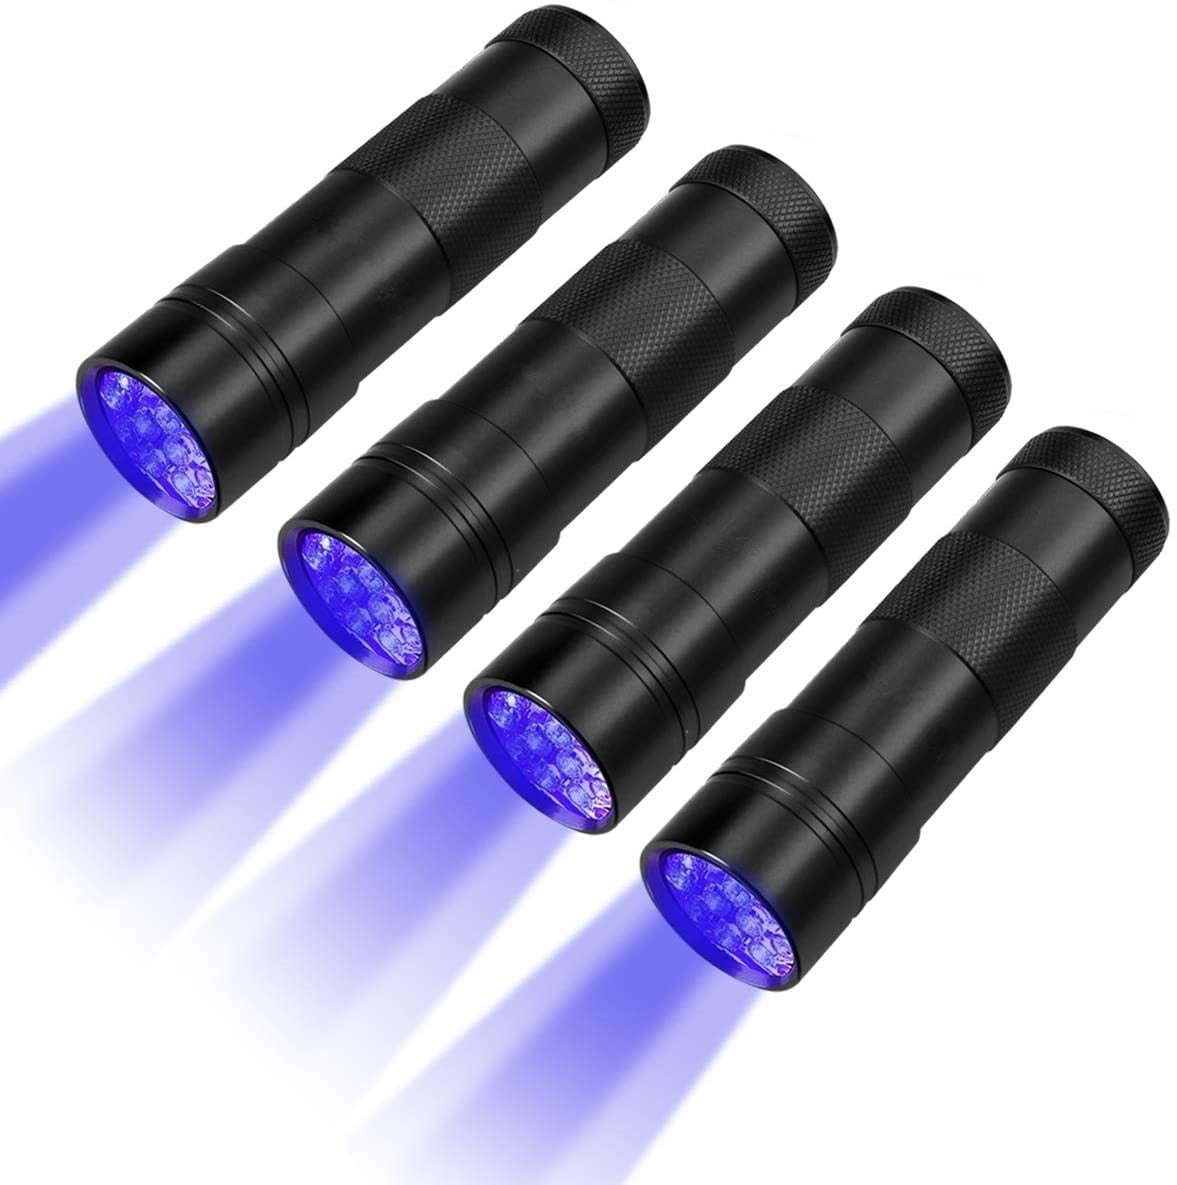 Pack of 4 Ultraviolet Torch Mini UV Lamp LED Torch 395 nm Ultraviolet Light Urine Detector for Fake Banknotes Pets Urine Outdoor Camping with 12 AAA Batteries